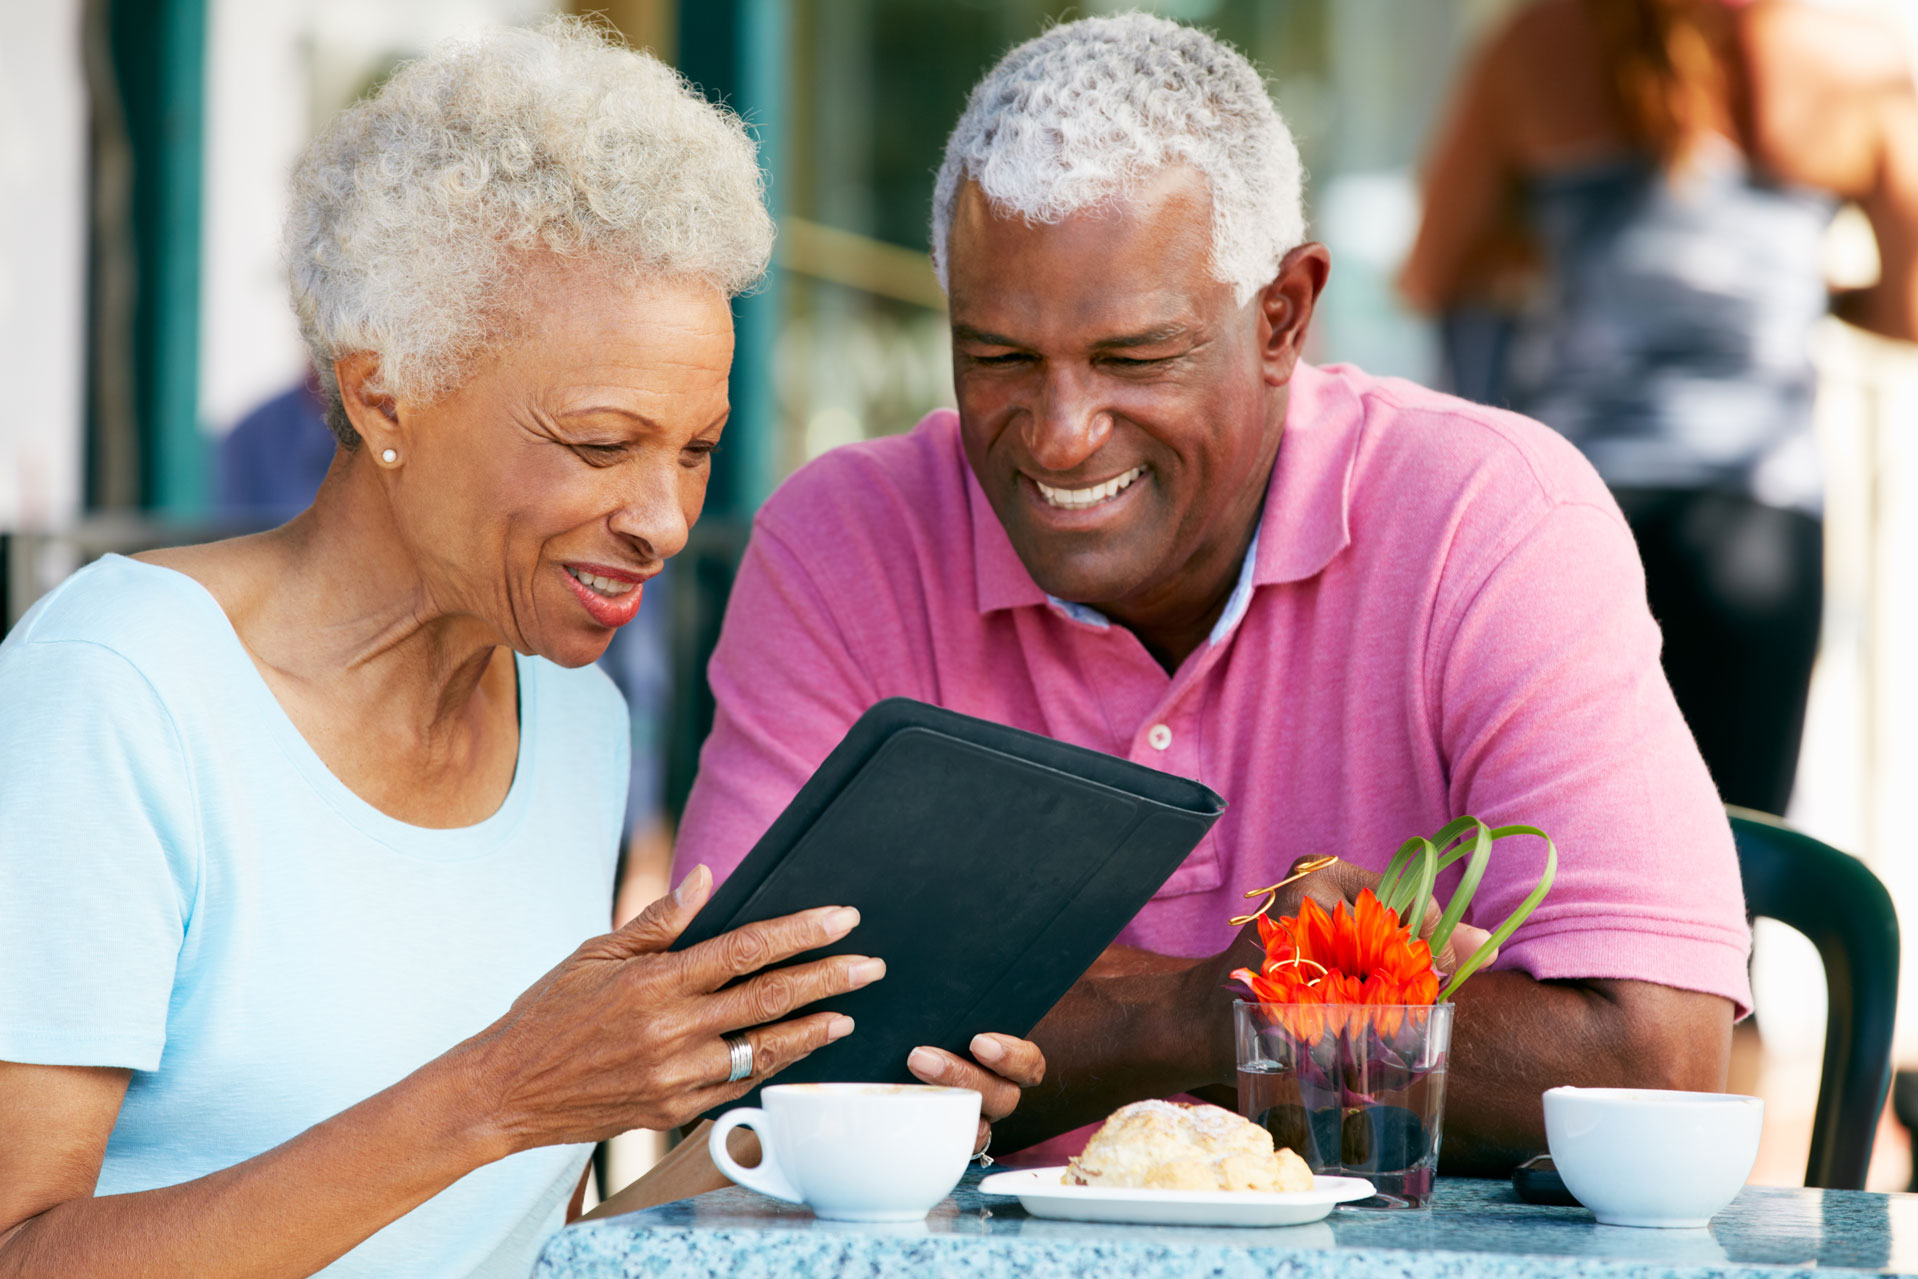 Smiling older couple uses tablet outdoors